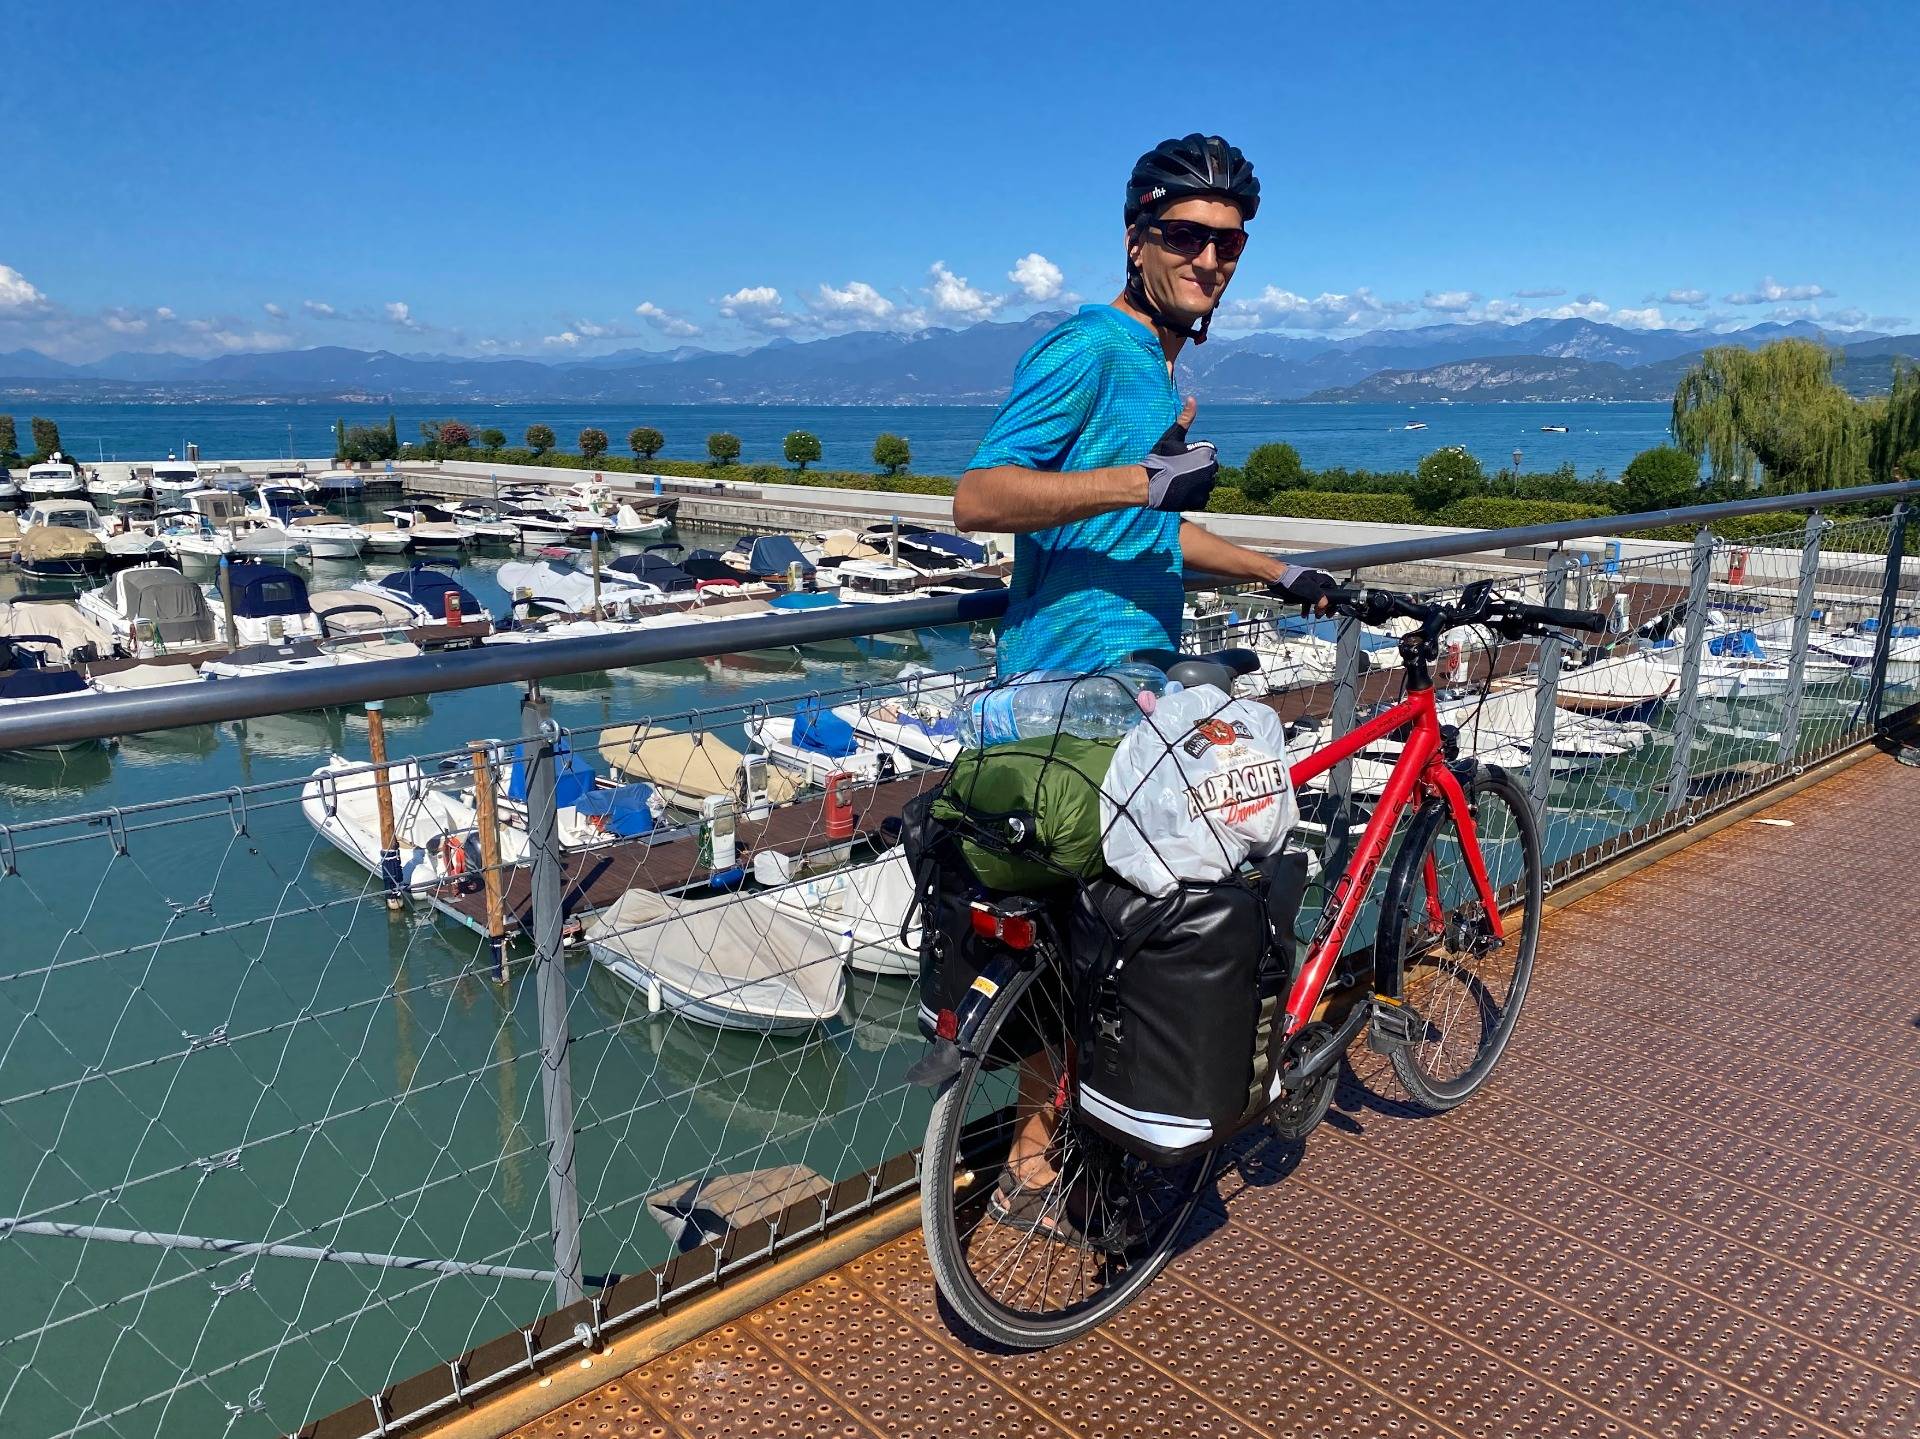 Thumbs up for EuroVelo 7 in Italy